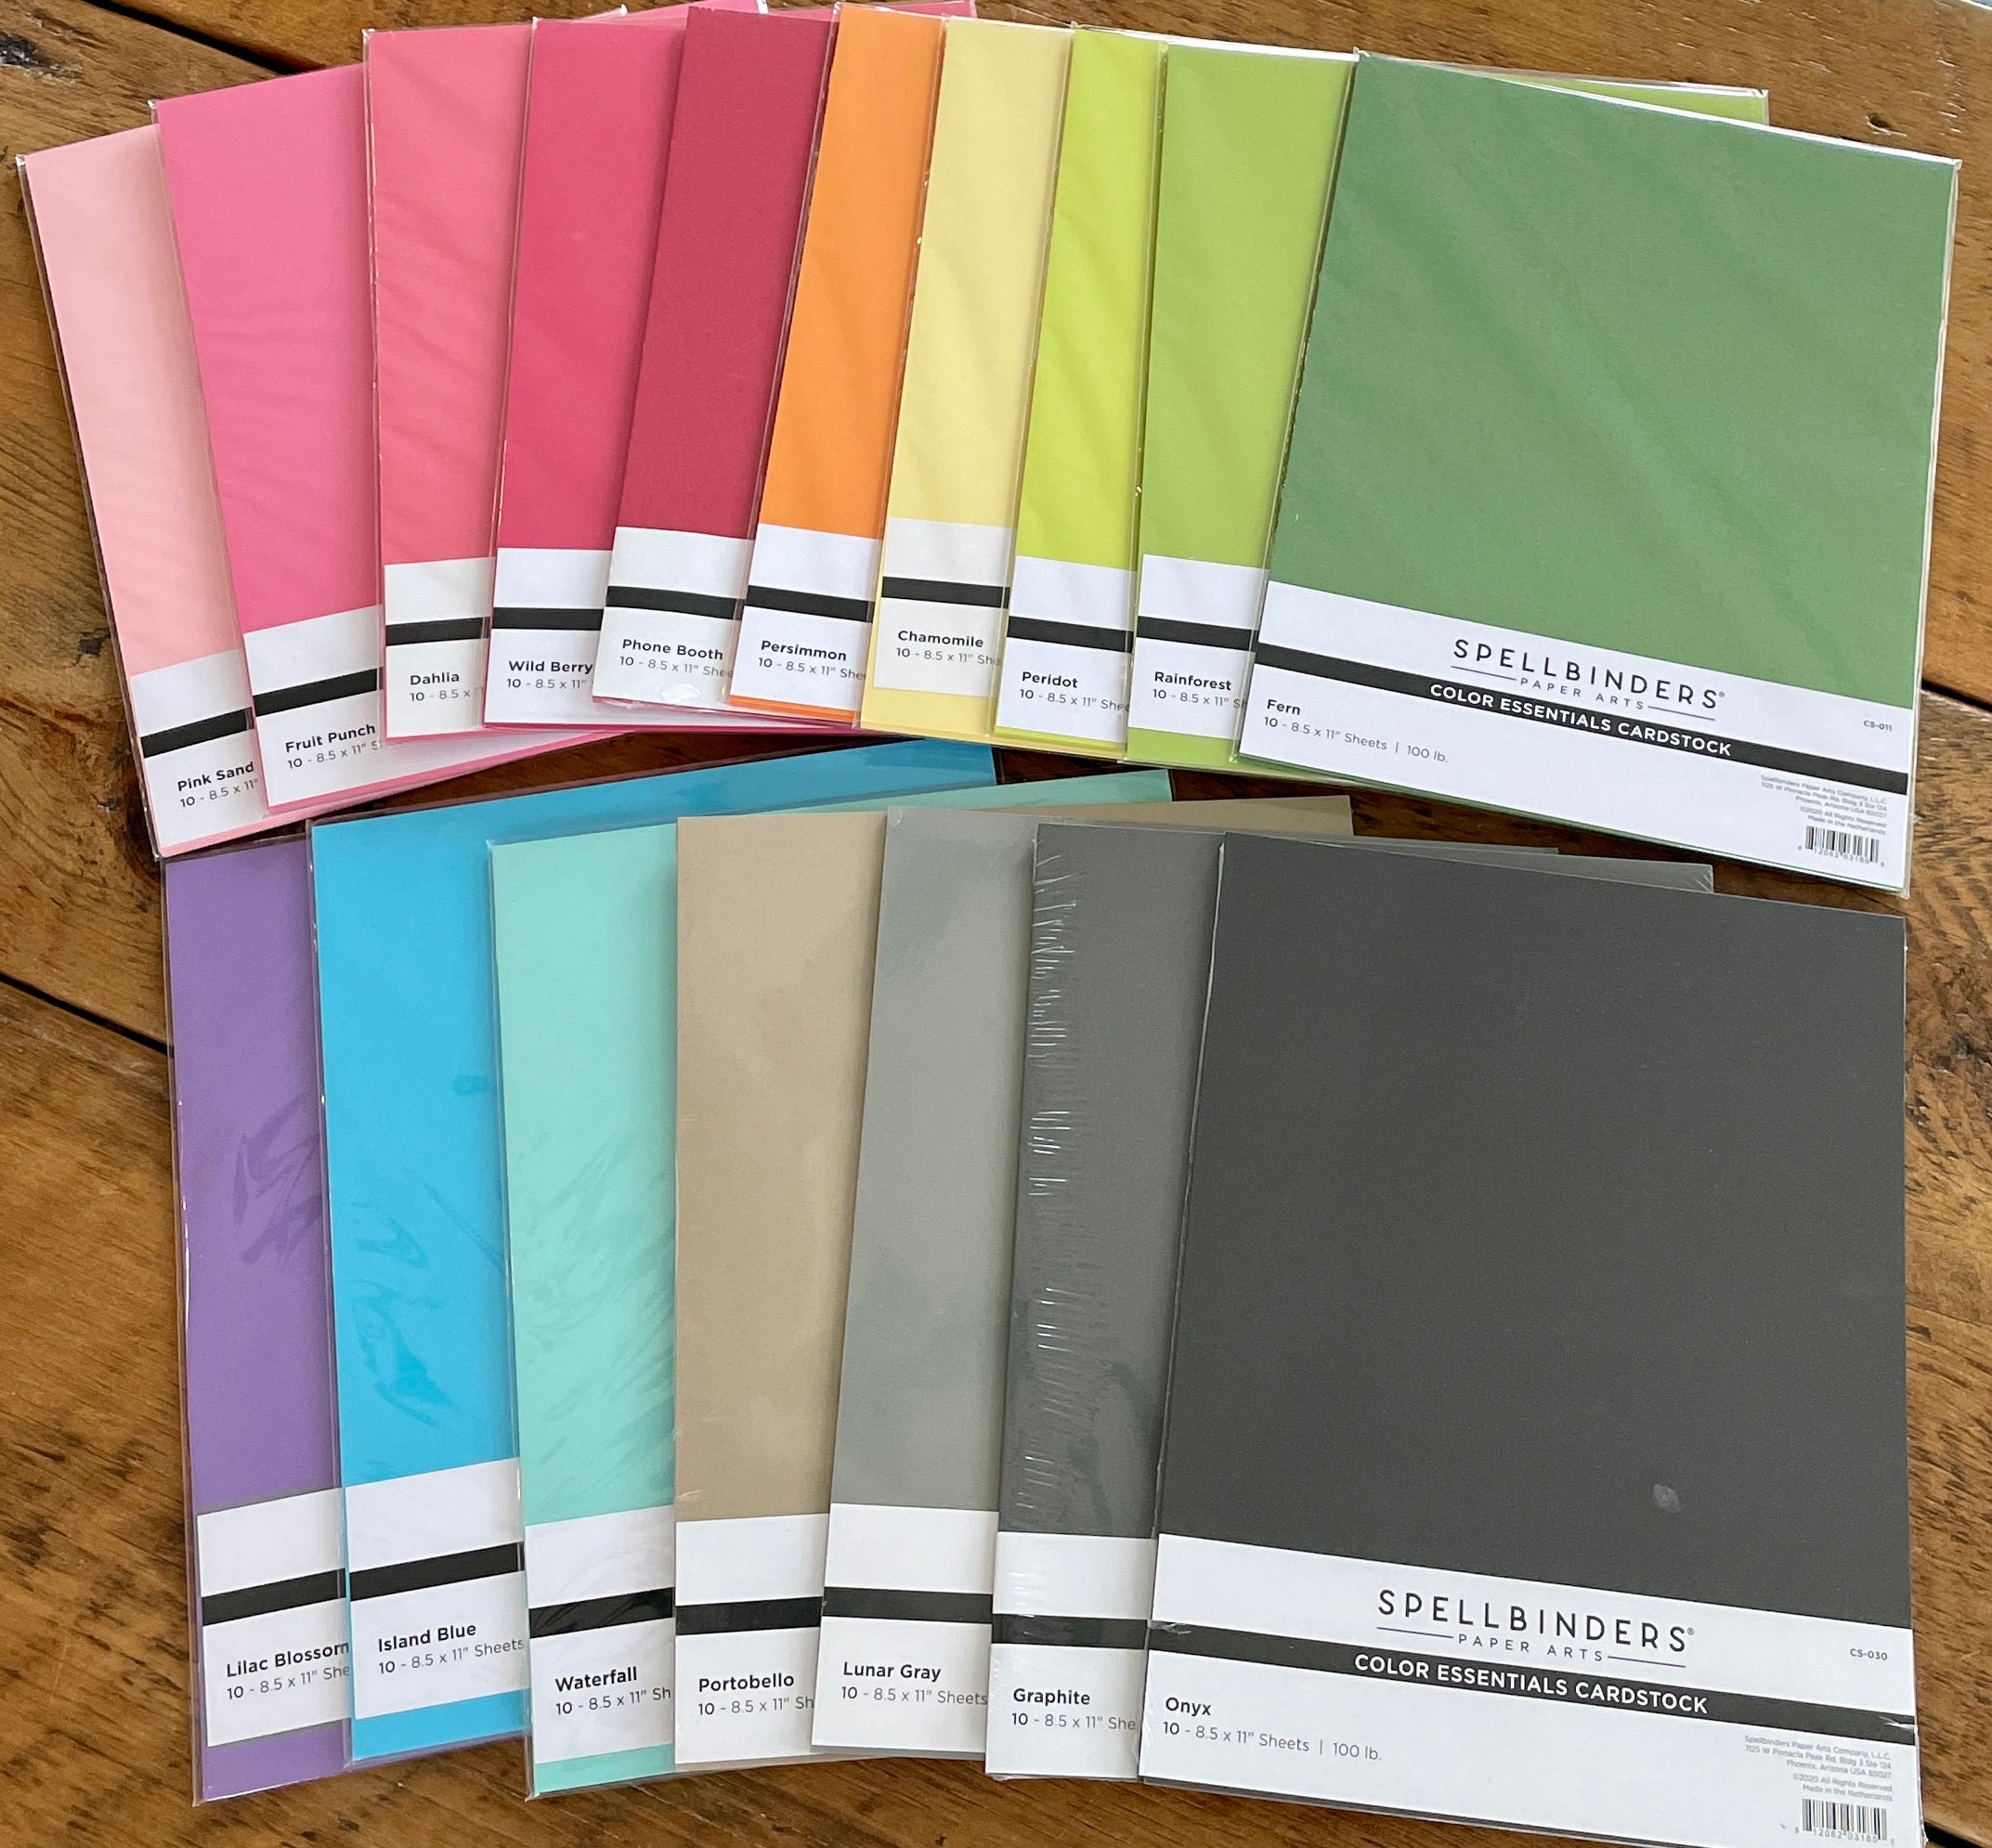 Clearance] BASIS COLORS - 8.5 x 11 CARDSTOCK PAPER - Blue - 80LB COVER -  100 PK